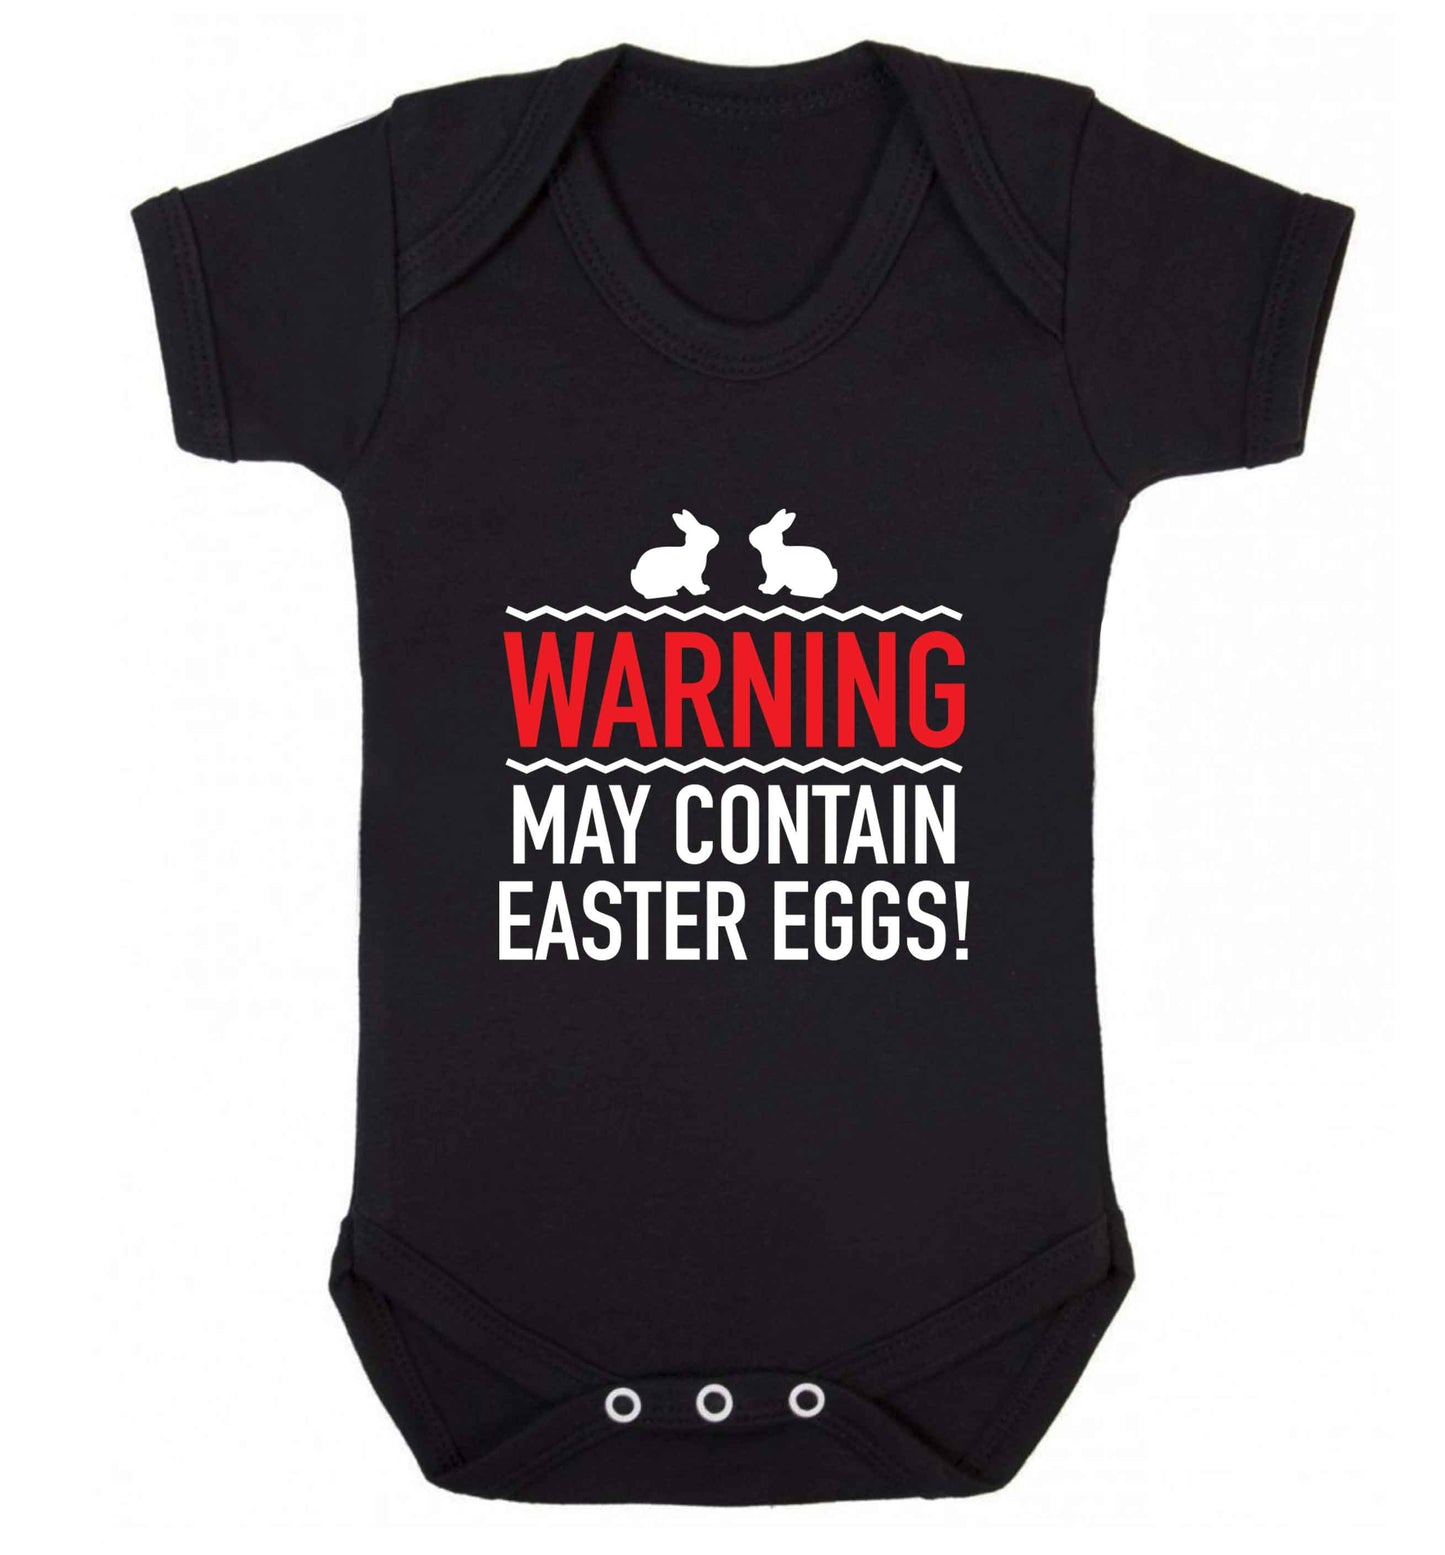 Warning may contain Easter eggs baby vest black 18-24 months